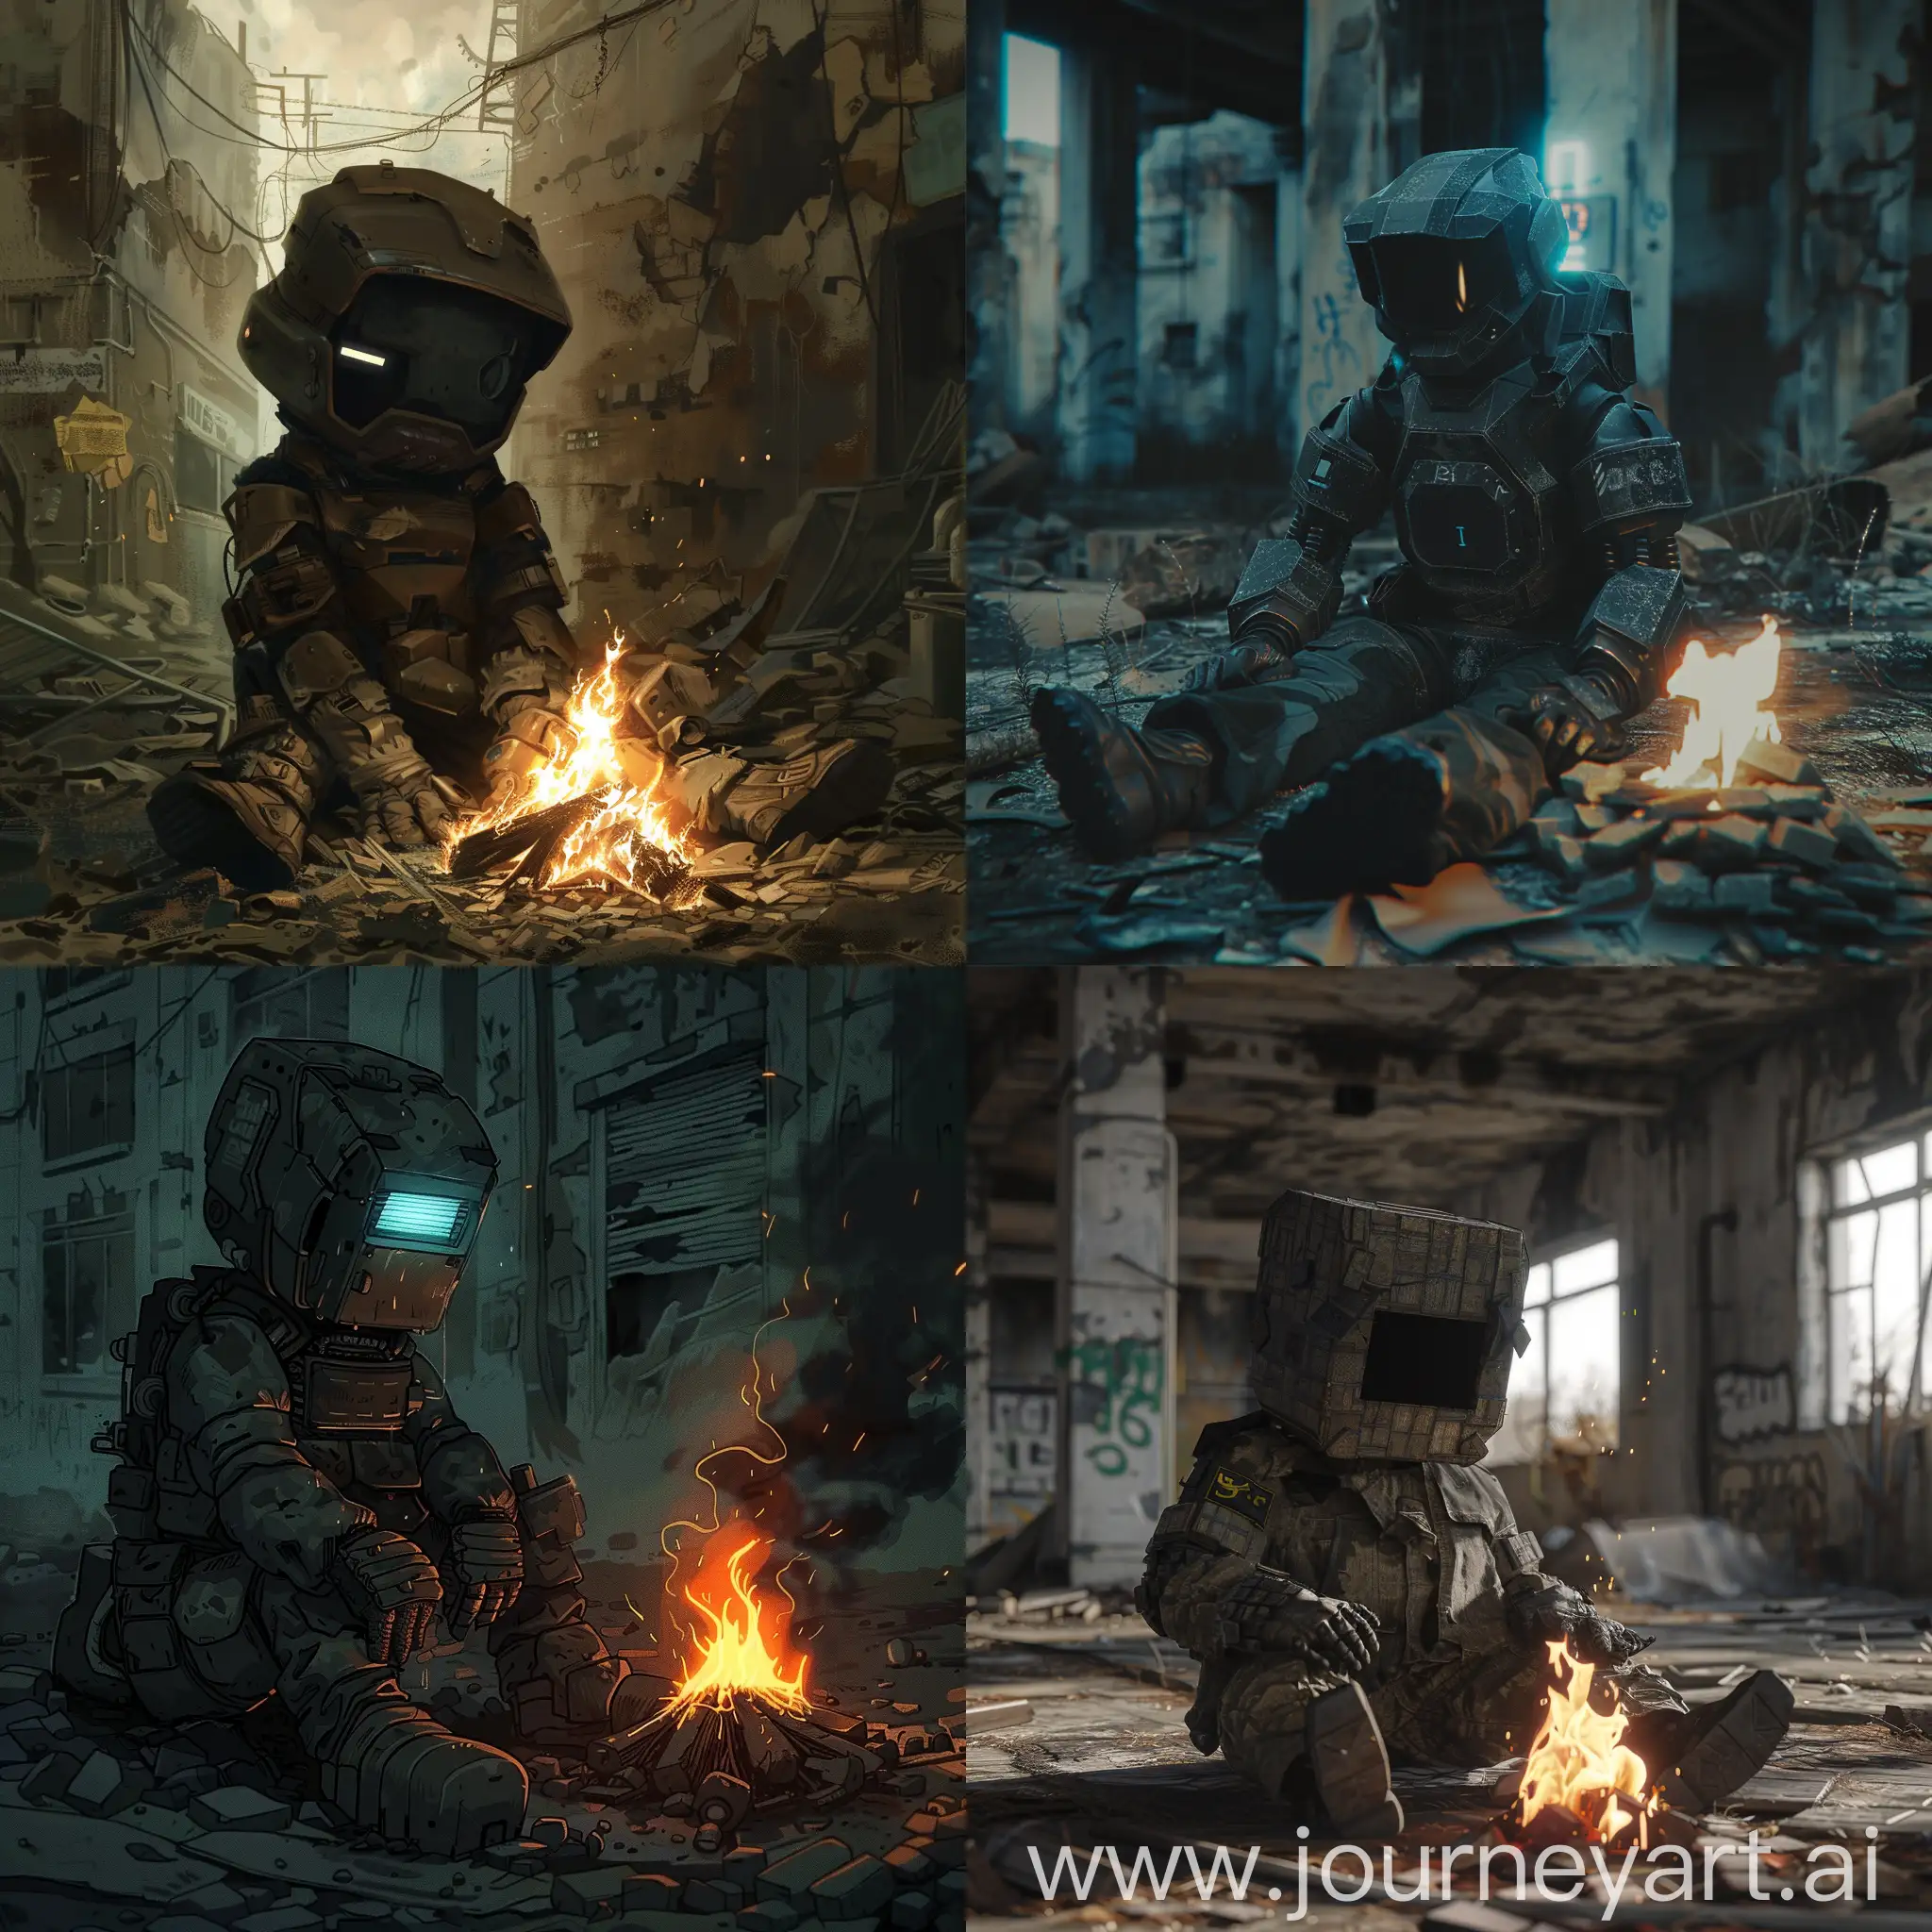 STALCRAFT-Character-in-PostApocalyptic-Campfire-Scene